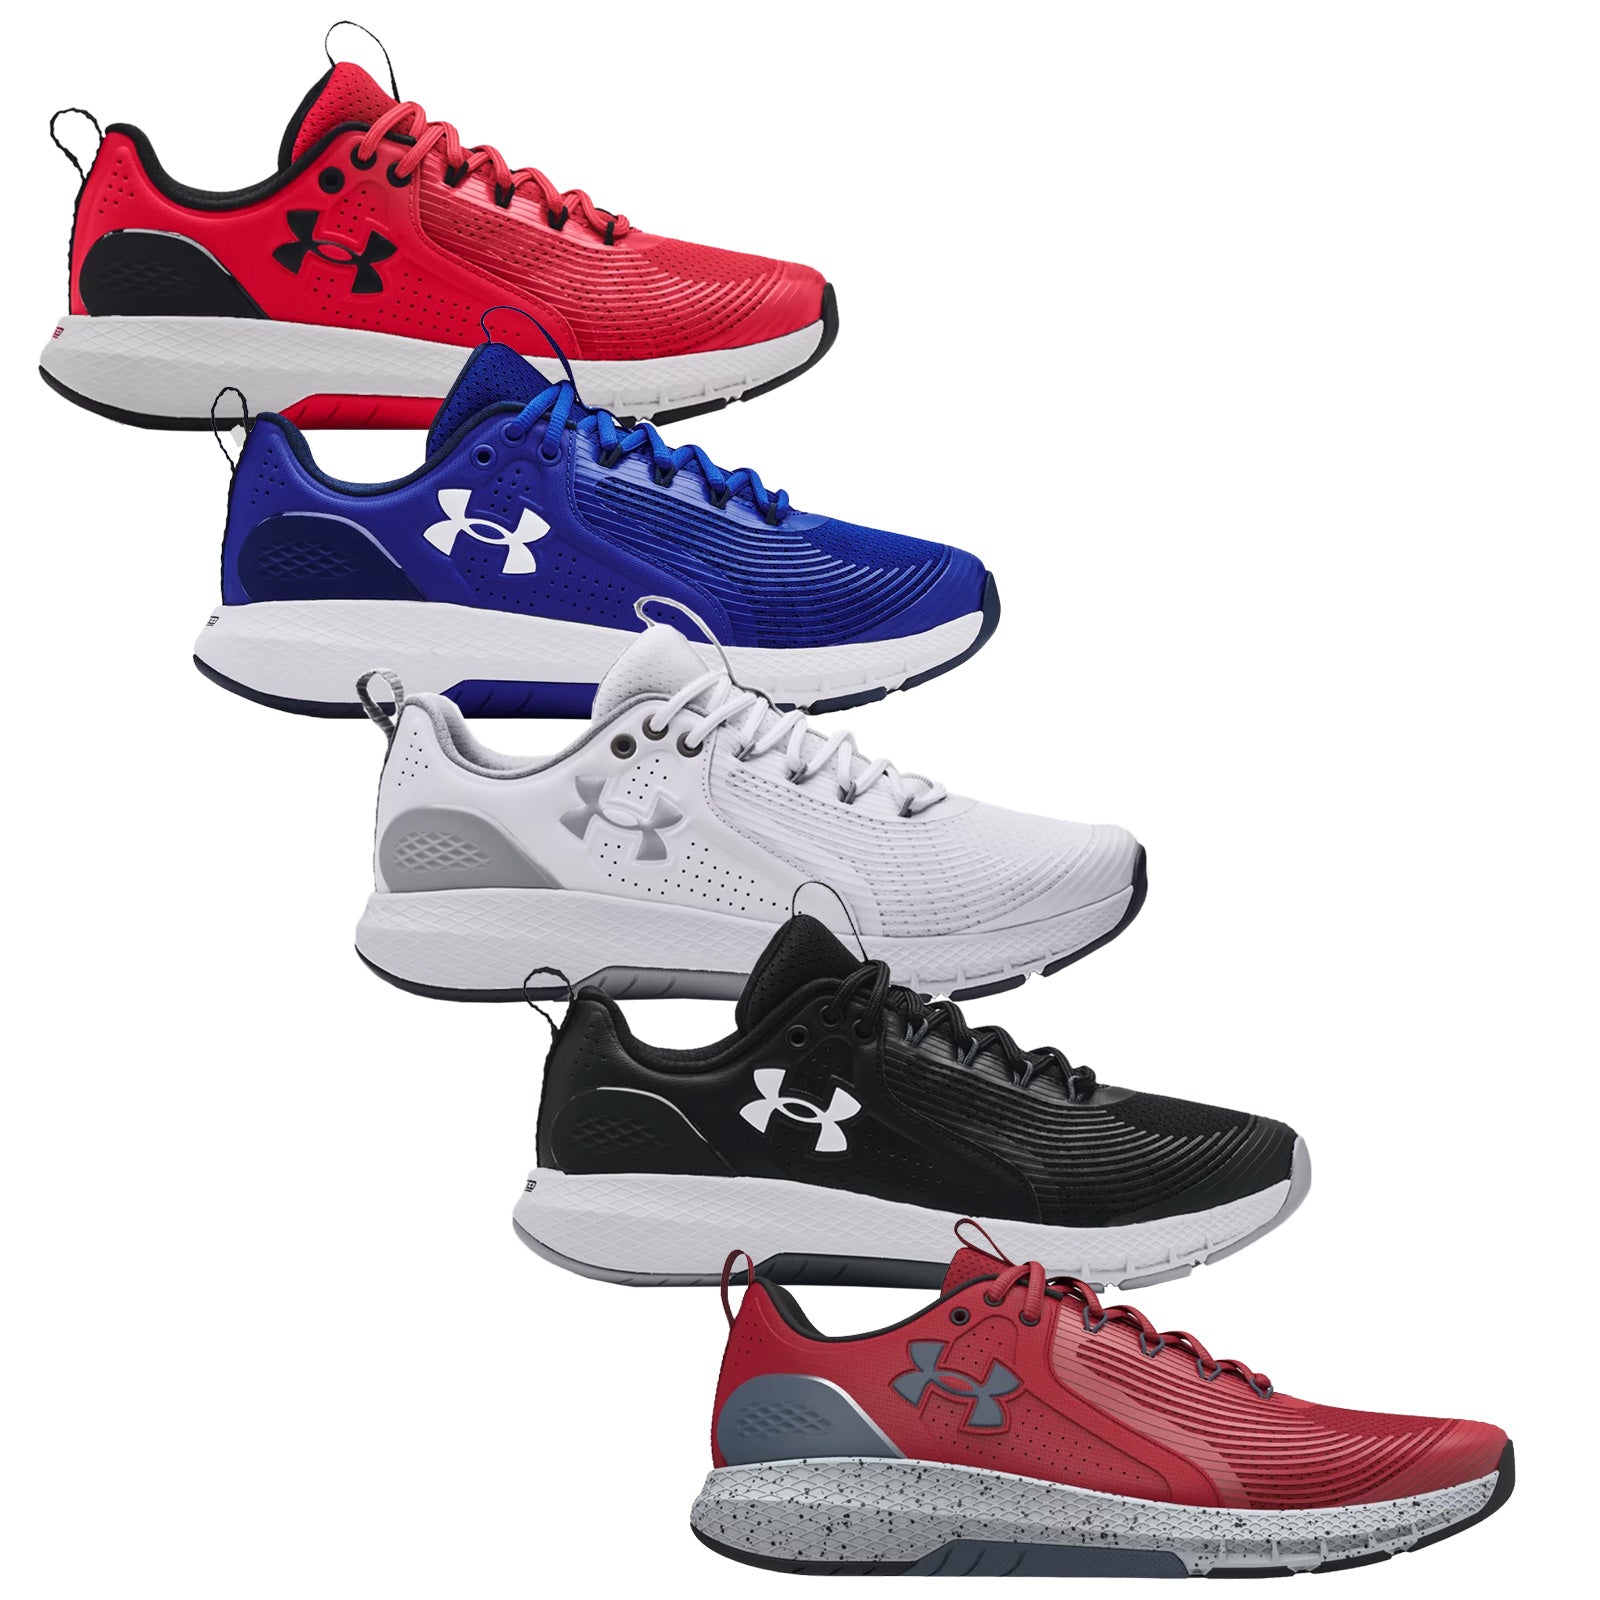 Under Armour Mens Charged Commit TR-3 Trainers